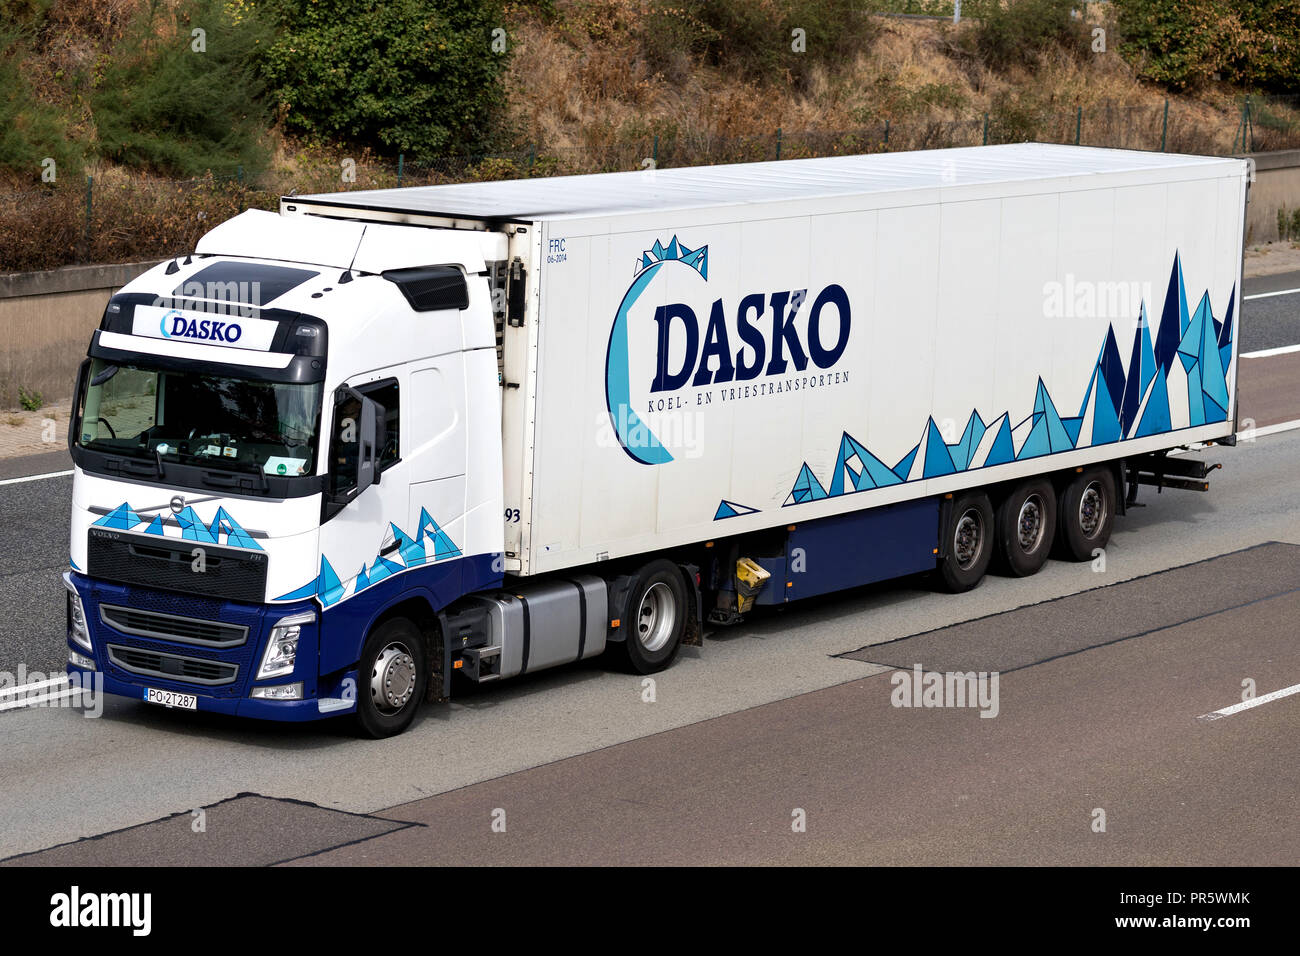 Dasko truck on motorway. Dasko is a family company that was established in 1913 and is specialized in refrigerated transport. Stock Photo